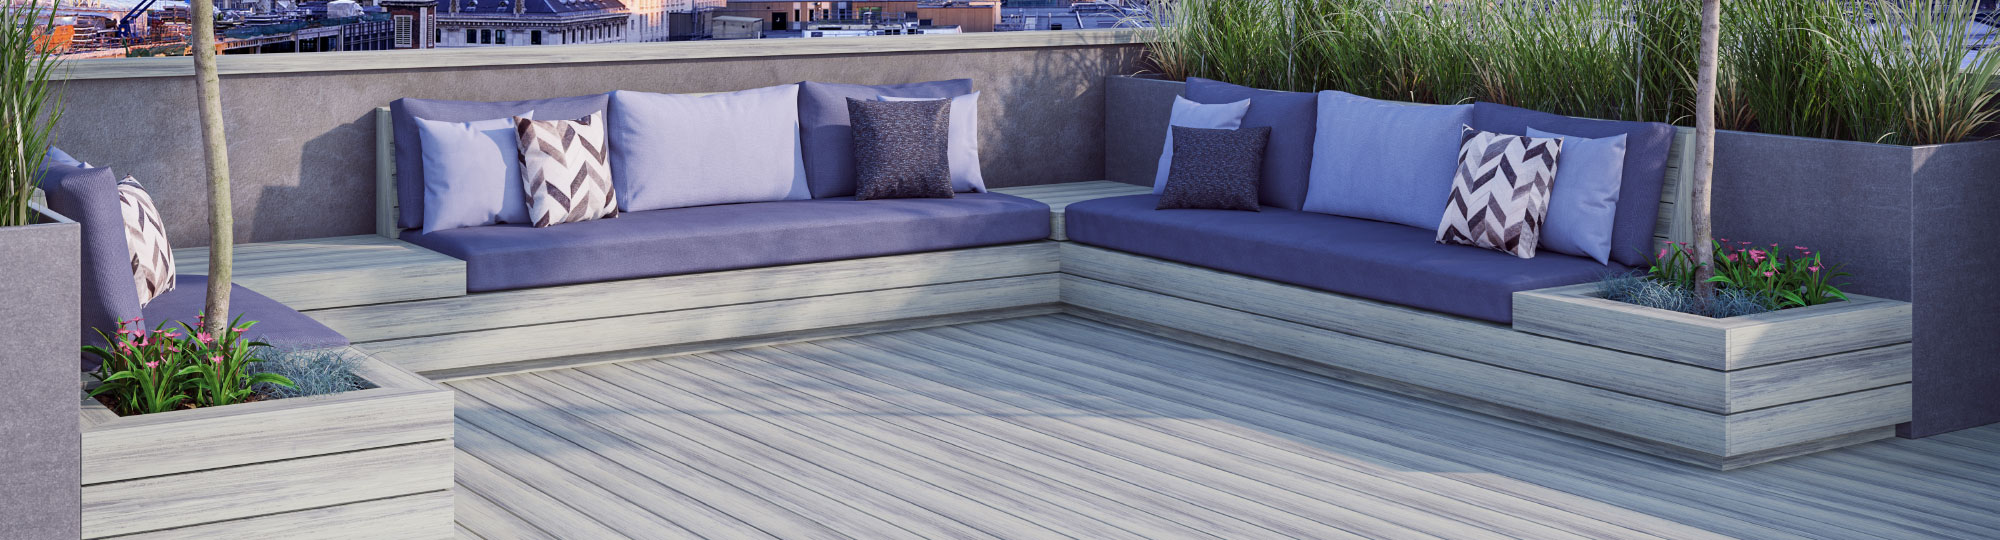 An outdoor living space with grey Voyage decking